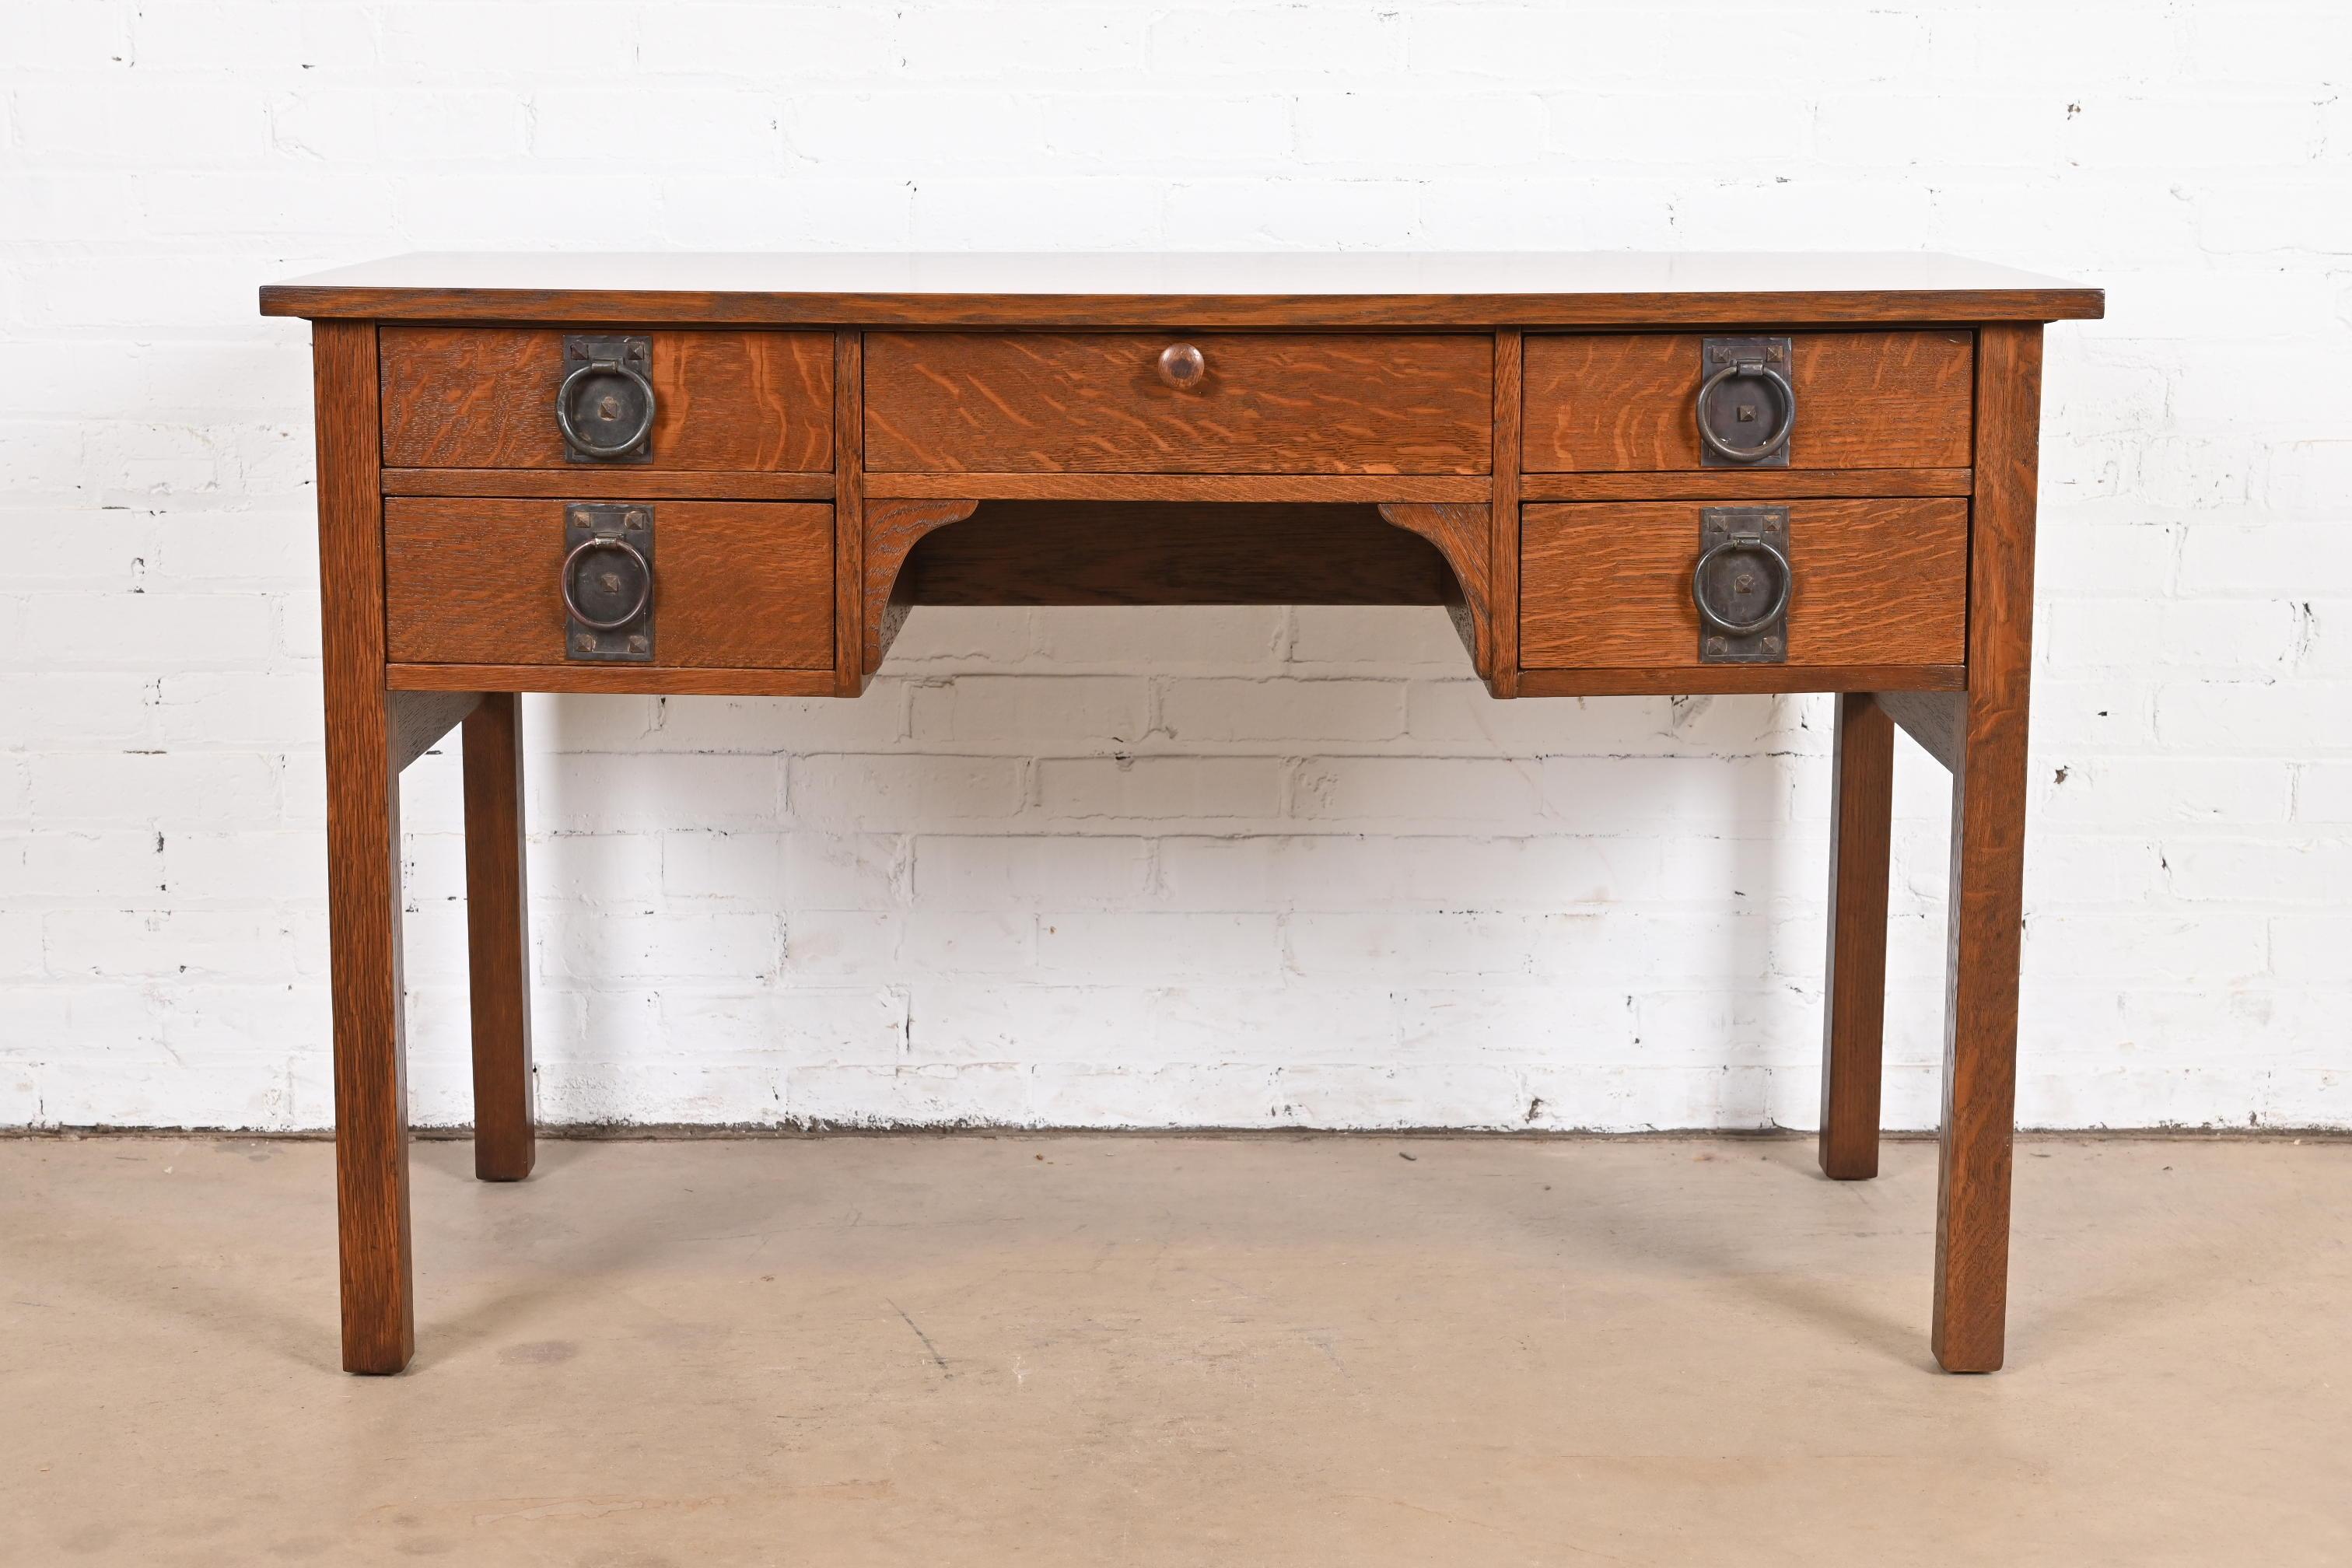 A rare and exceptional antique Mission or Arts & Crafts writing desk

By Gustav Stickley (original label present)

USA, Early 20th Century

Solid quarter sawn oak, with original hammered copper hardware.

Measures: 48